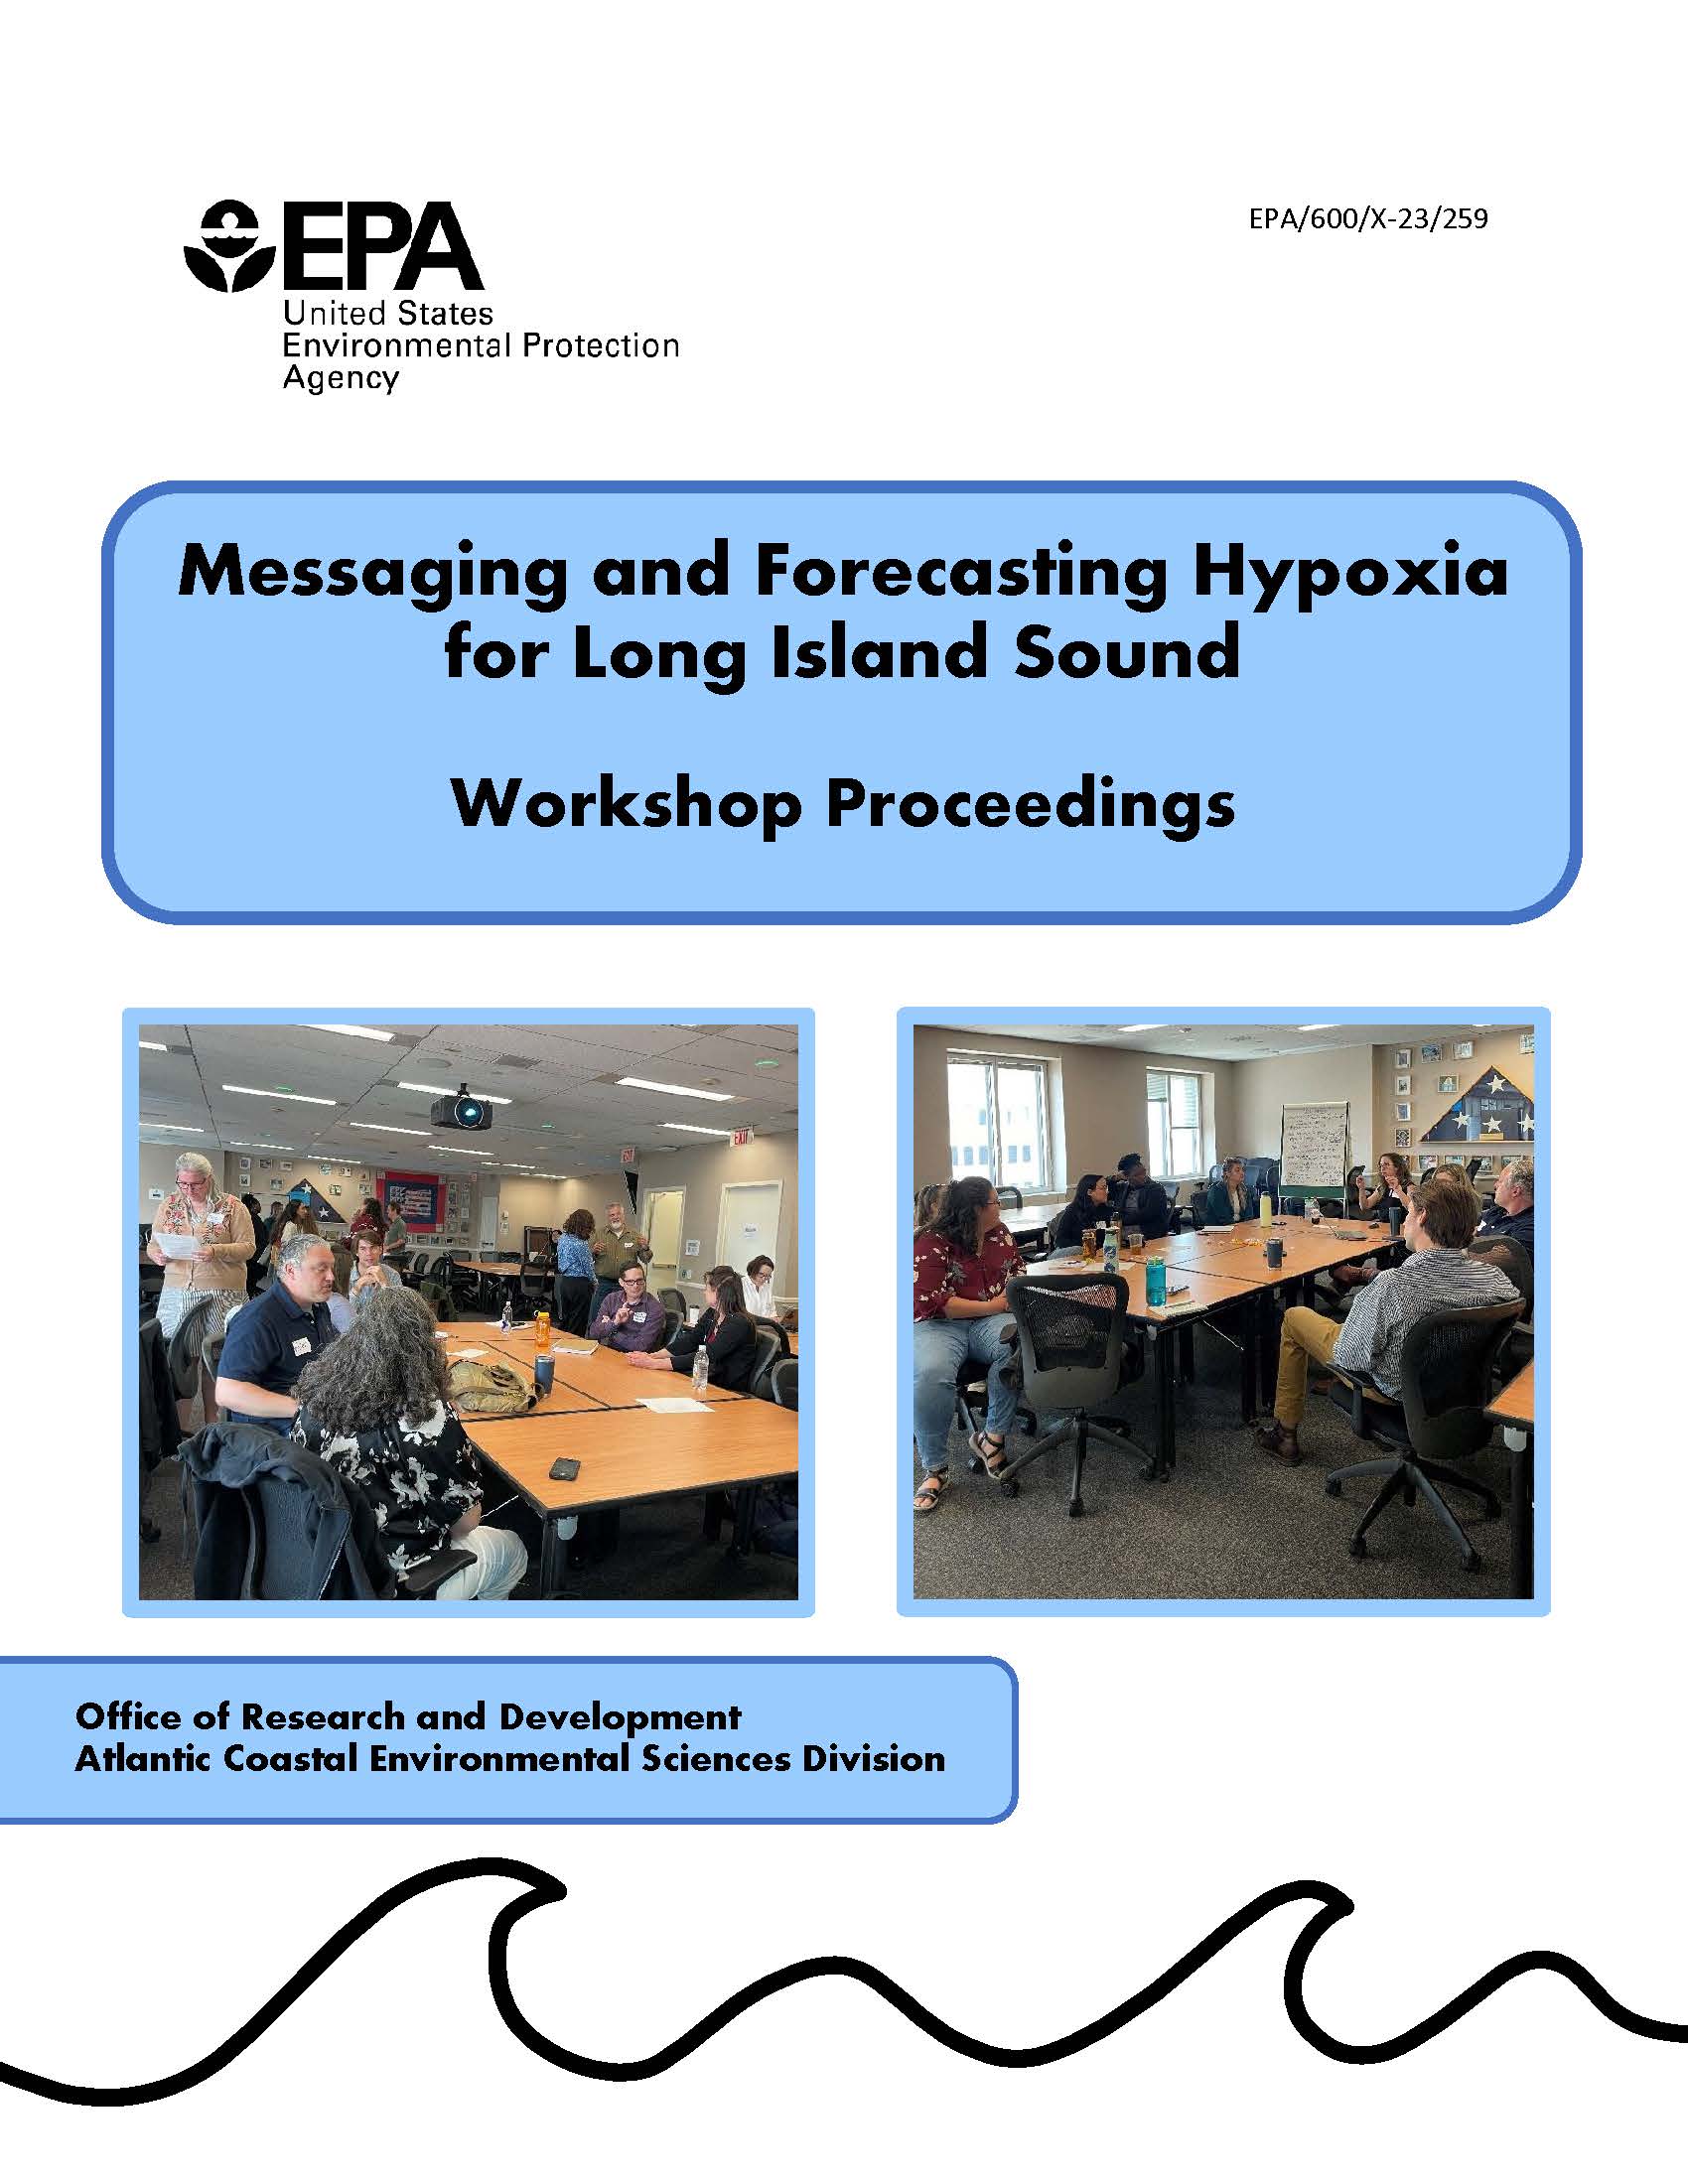 Cover image for the Messaging and Forecasting Hypoxia for Long Island Sound Workshop Proceedings report